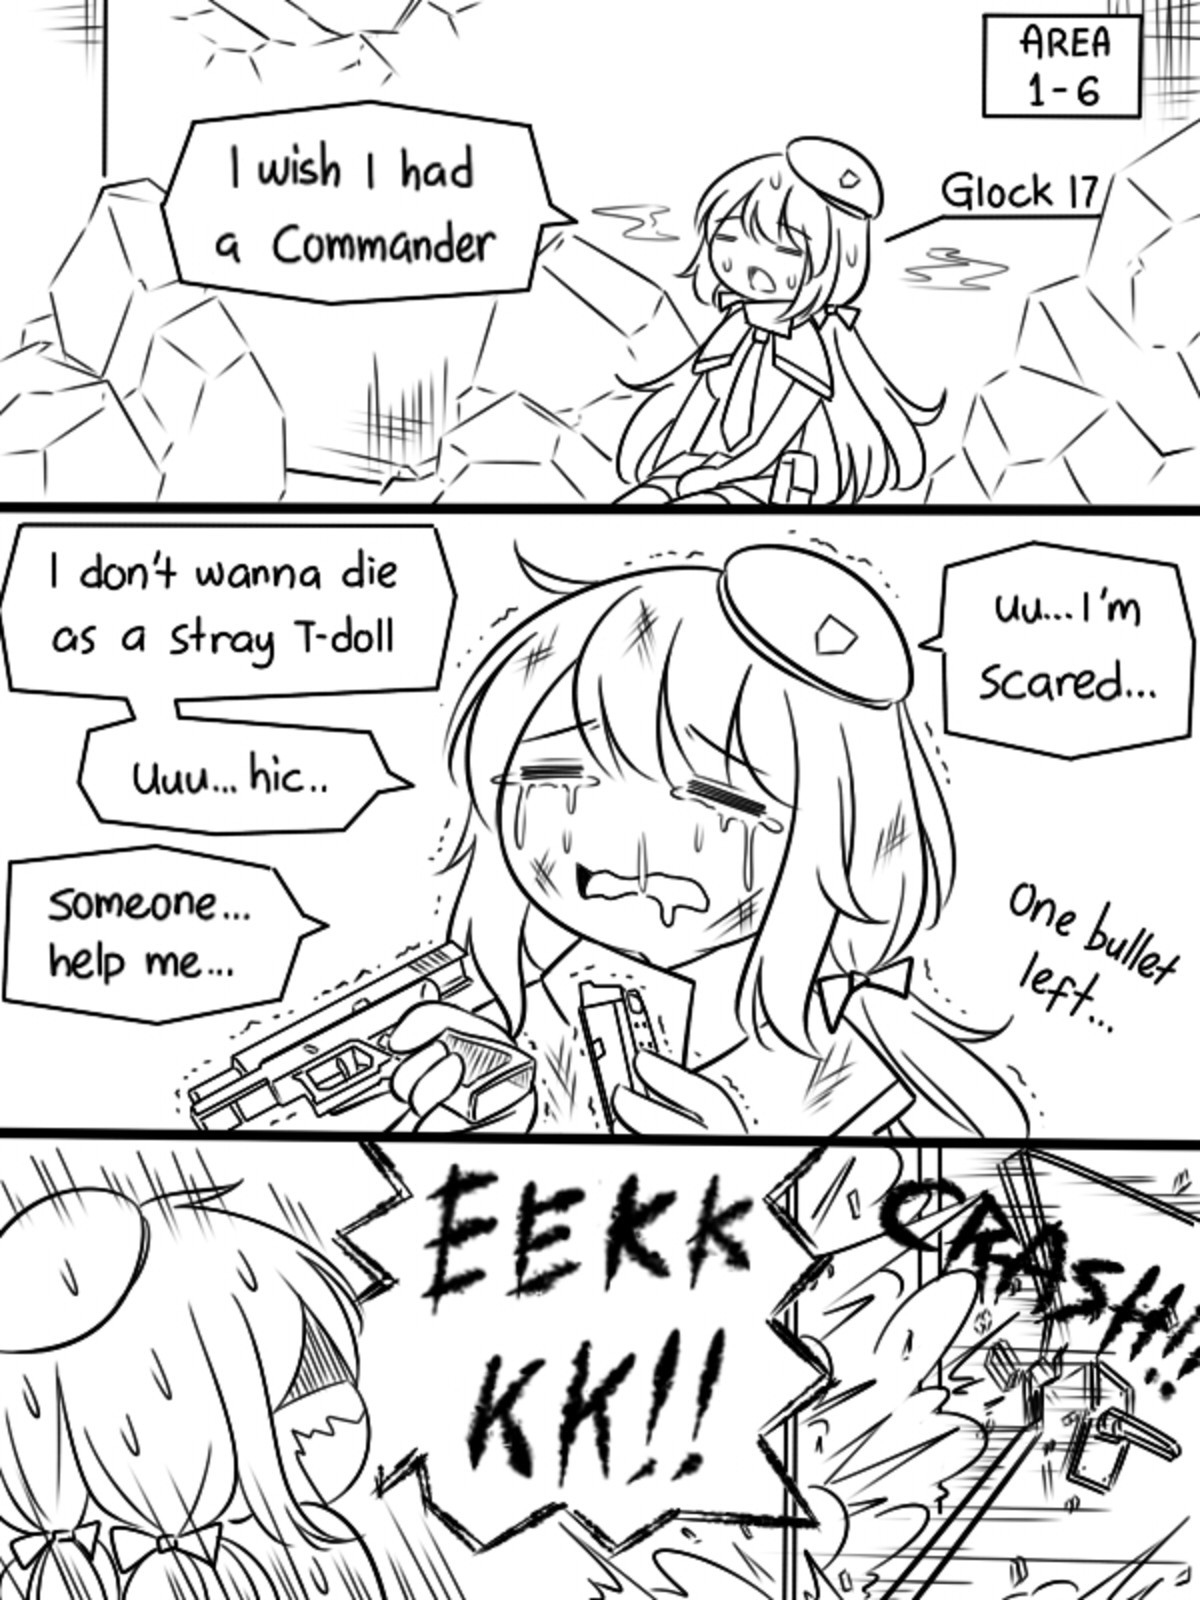 Rescuing a Stray Glock 17. Source illust.php?mode=medium&amp;illustid=69016340 join list: MilitaryWaifu (516 subs)Mention History. I don? wanna die as a Shag Bi